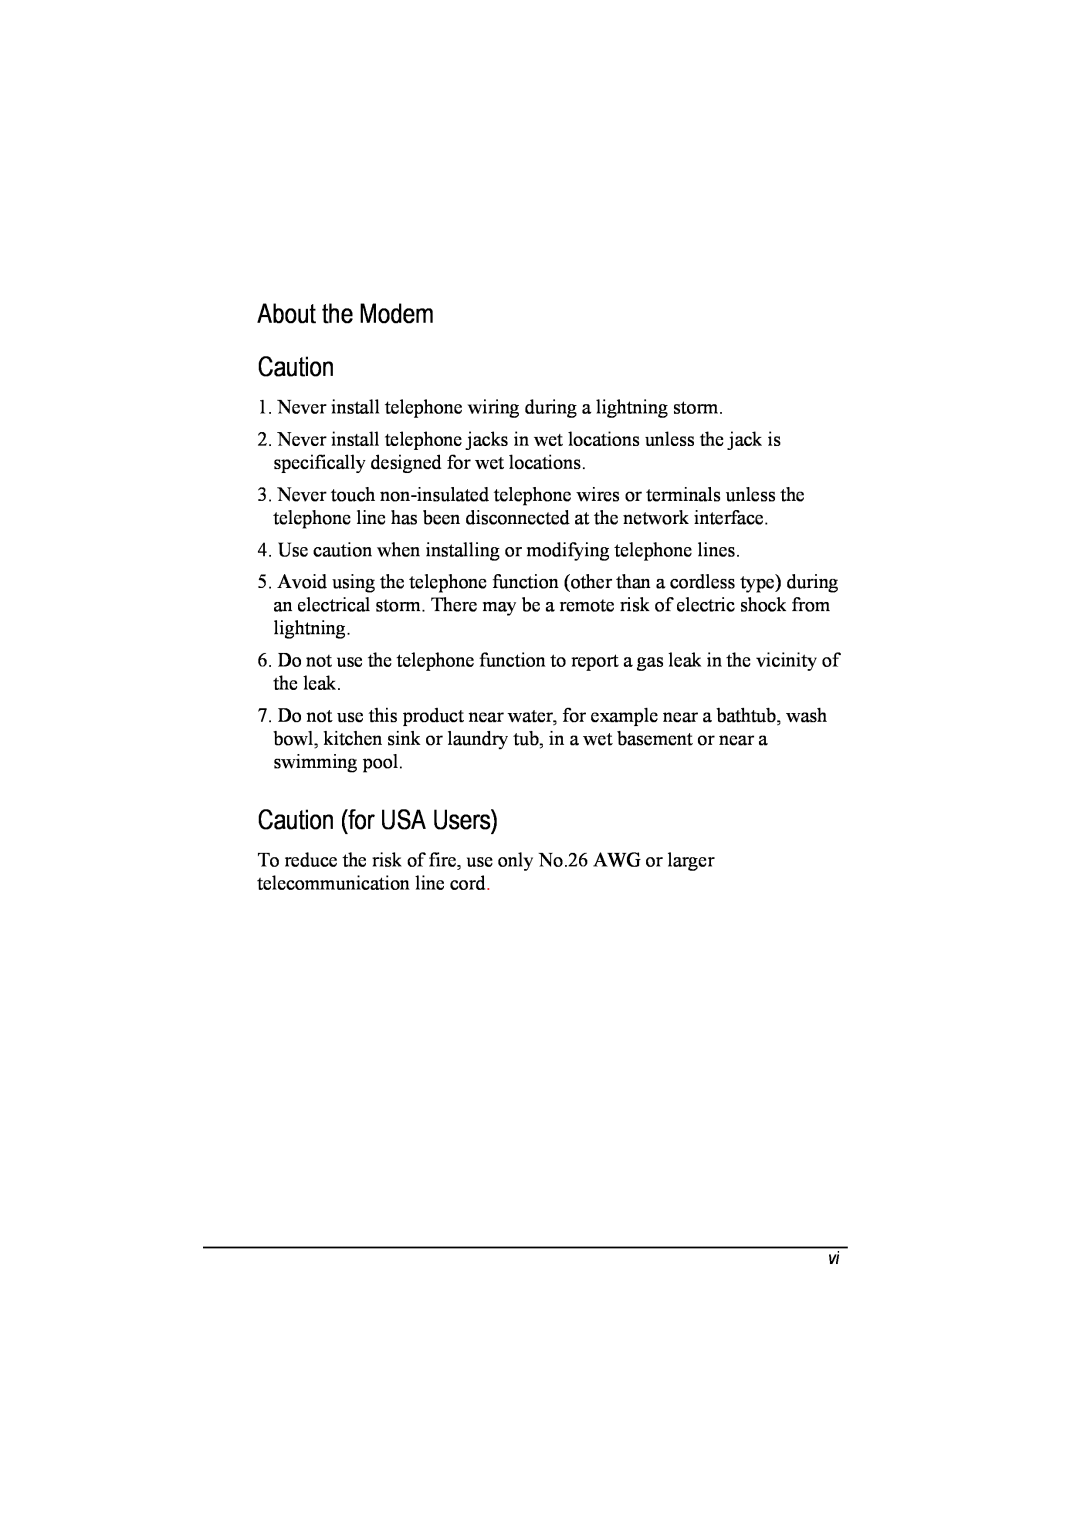 TAG 20 Series manual About the Modem, Caution for USA Users 